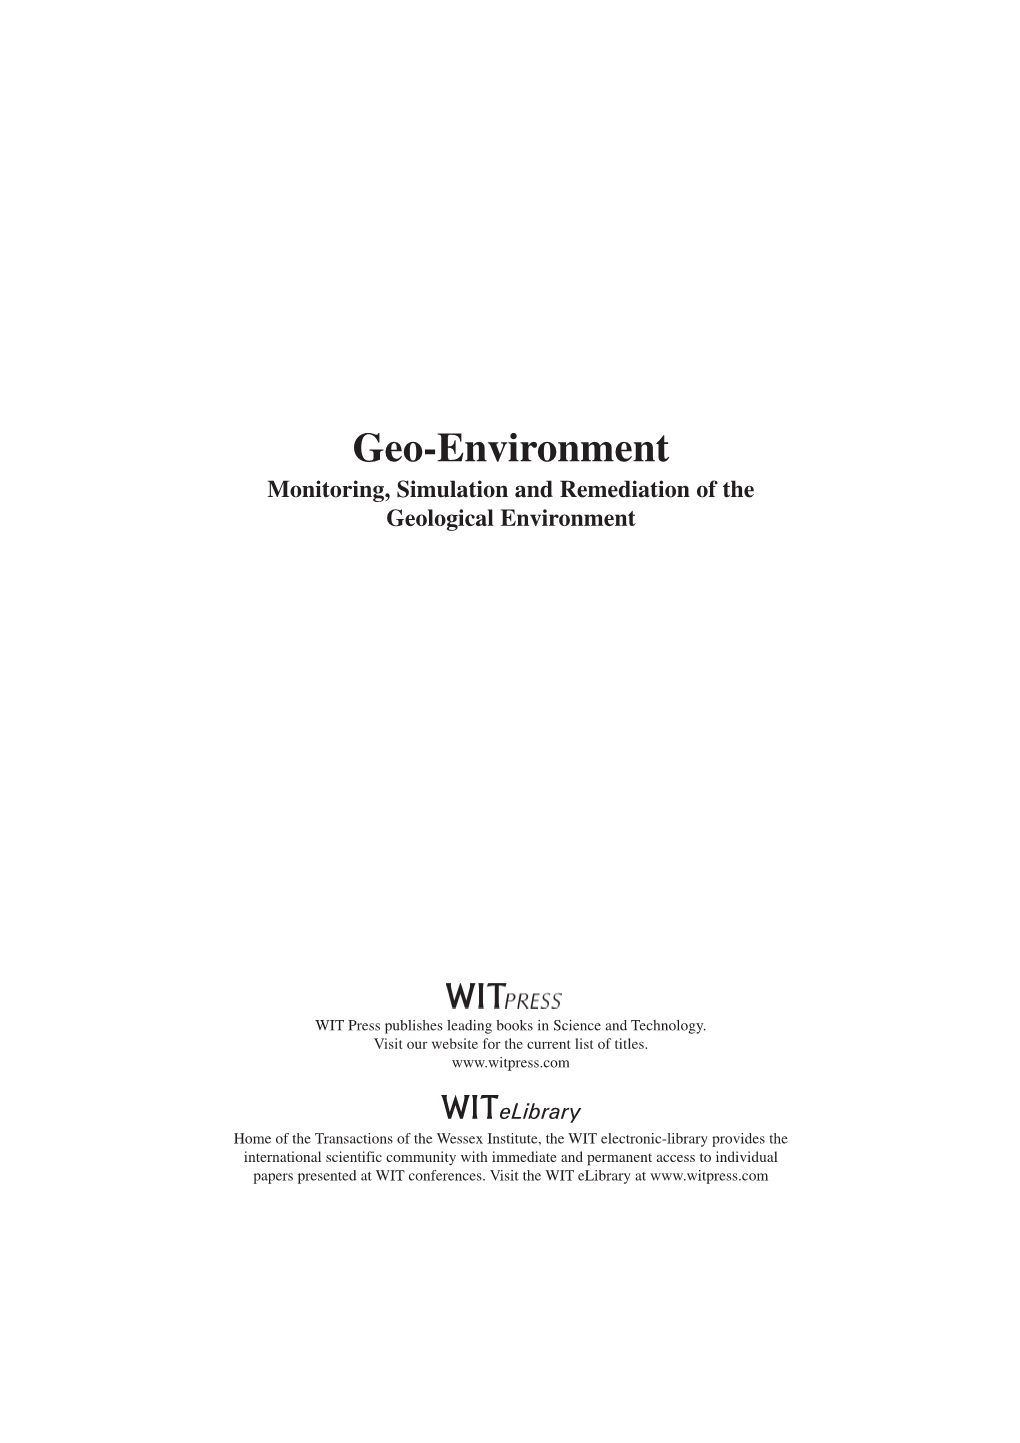 Geo-Environment Monitoring, Simulation and Remediation of the Geological Environment